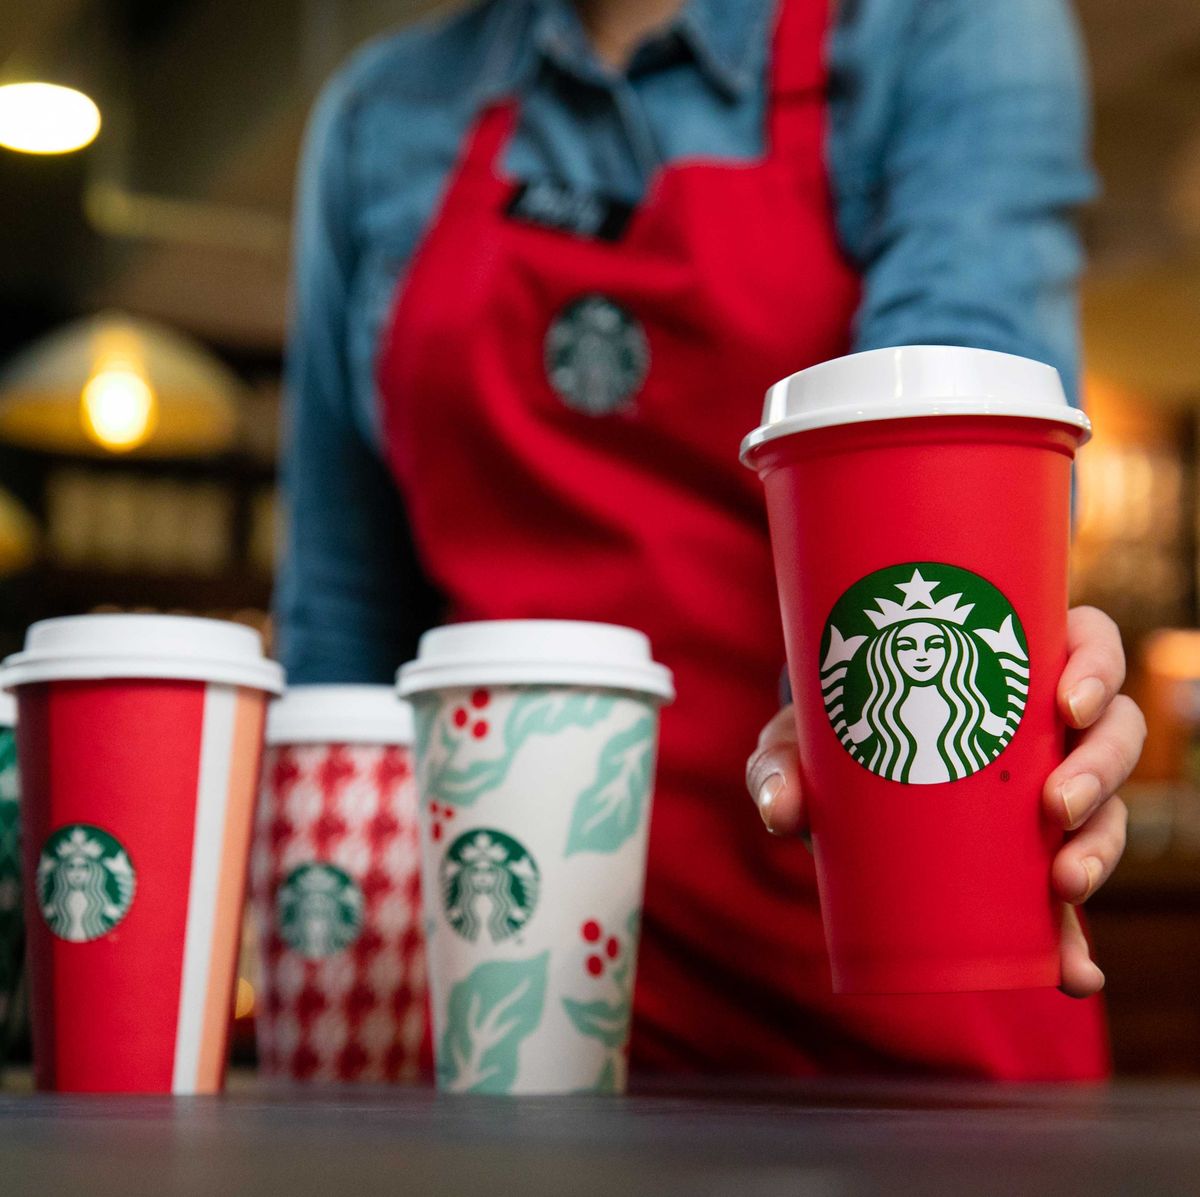 https://hips.hearstapps.com/hmg-prod/images/starbucks-holiday-2018-cups-3-1541012398.jpg?crop=0.668xw:1.00xh;0.194xw,0&resize=1200:*